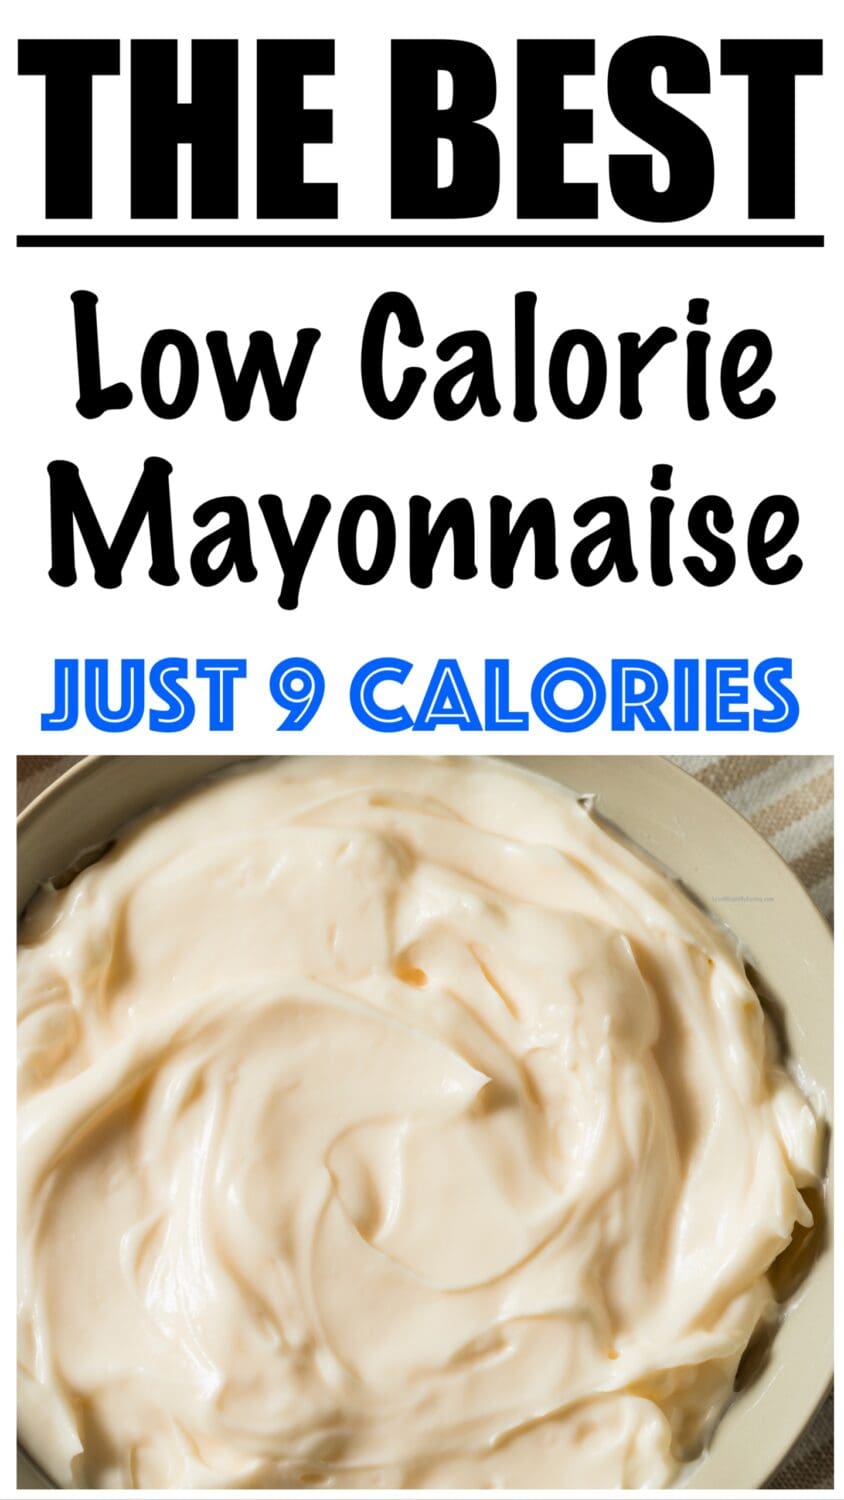 Low Calorie Mayonnaise Recipe